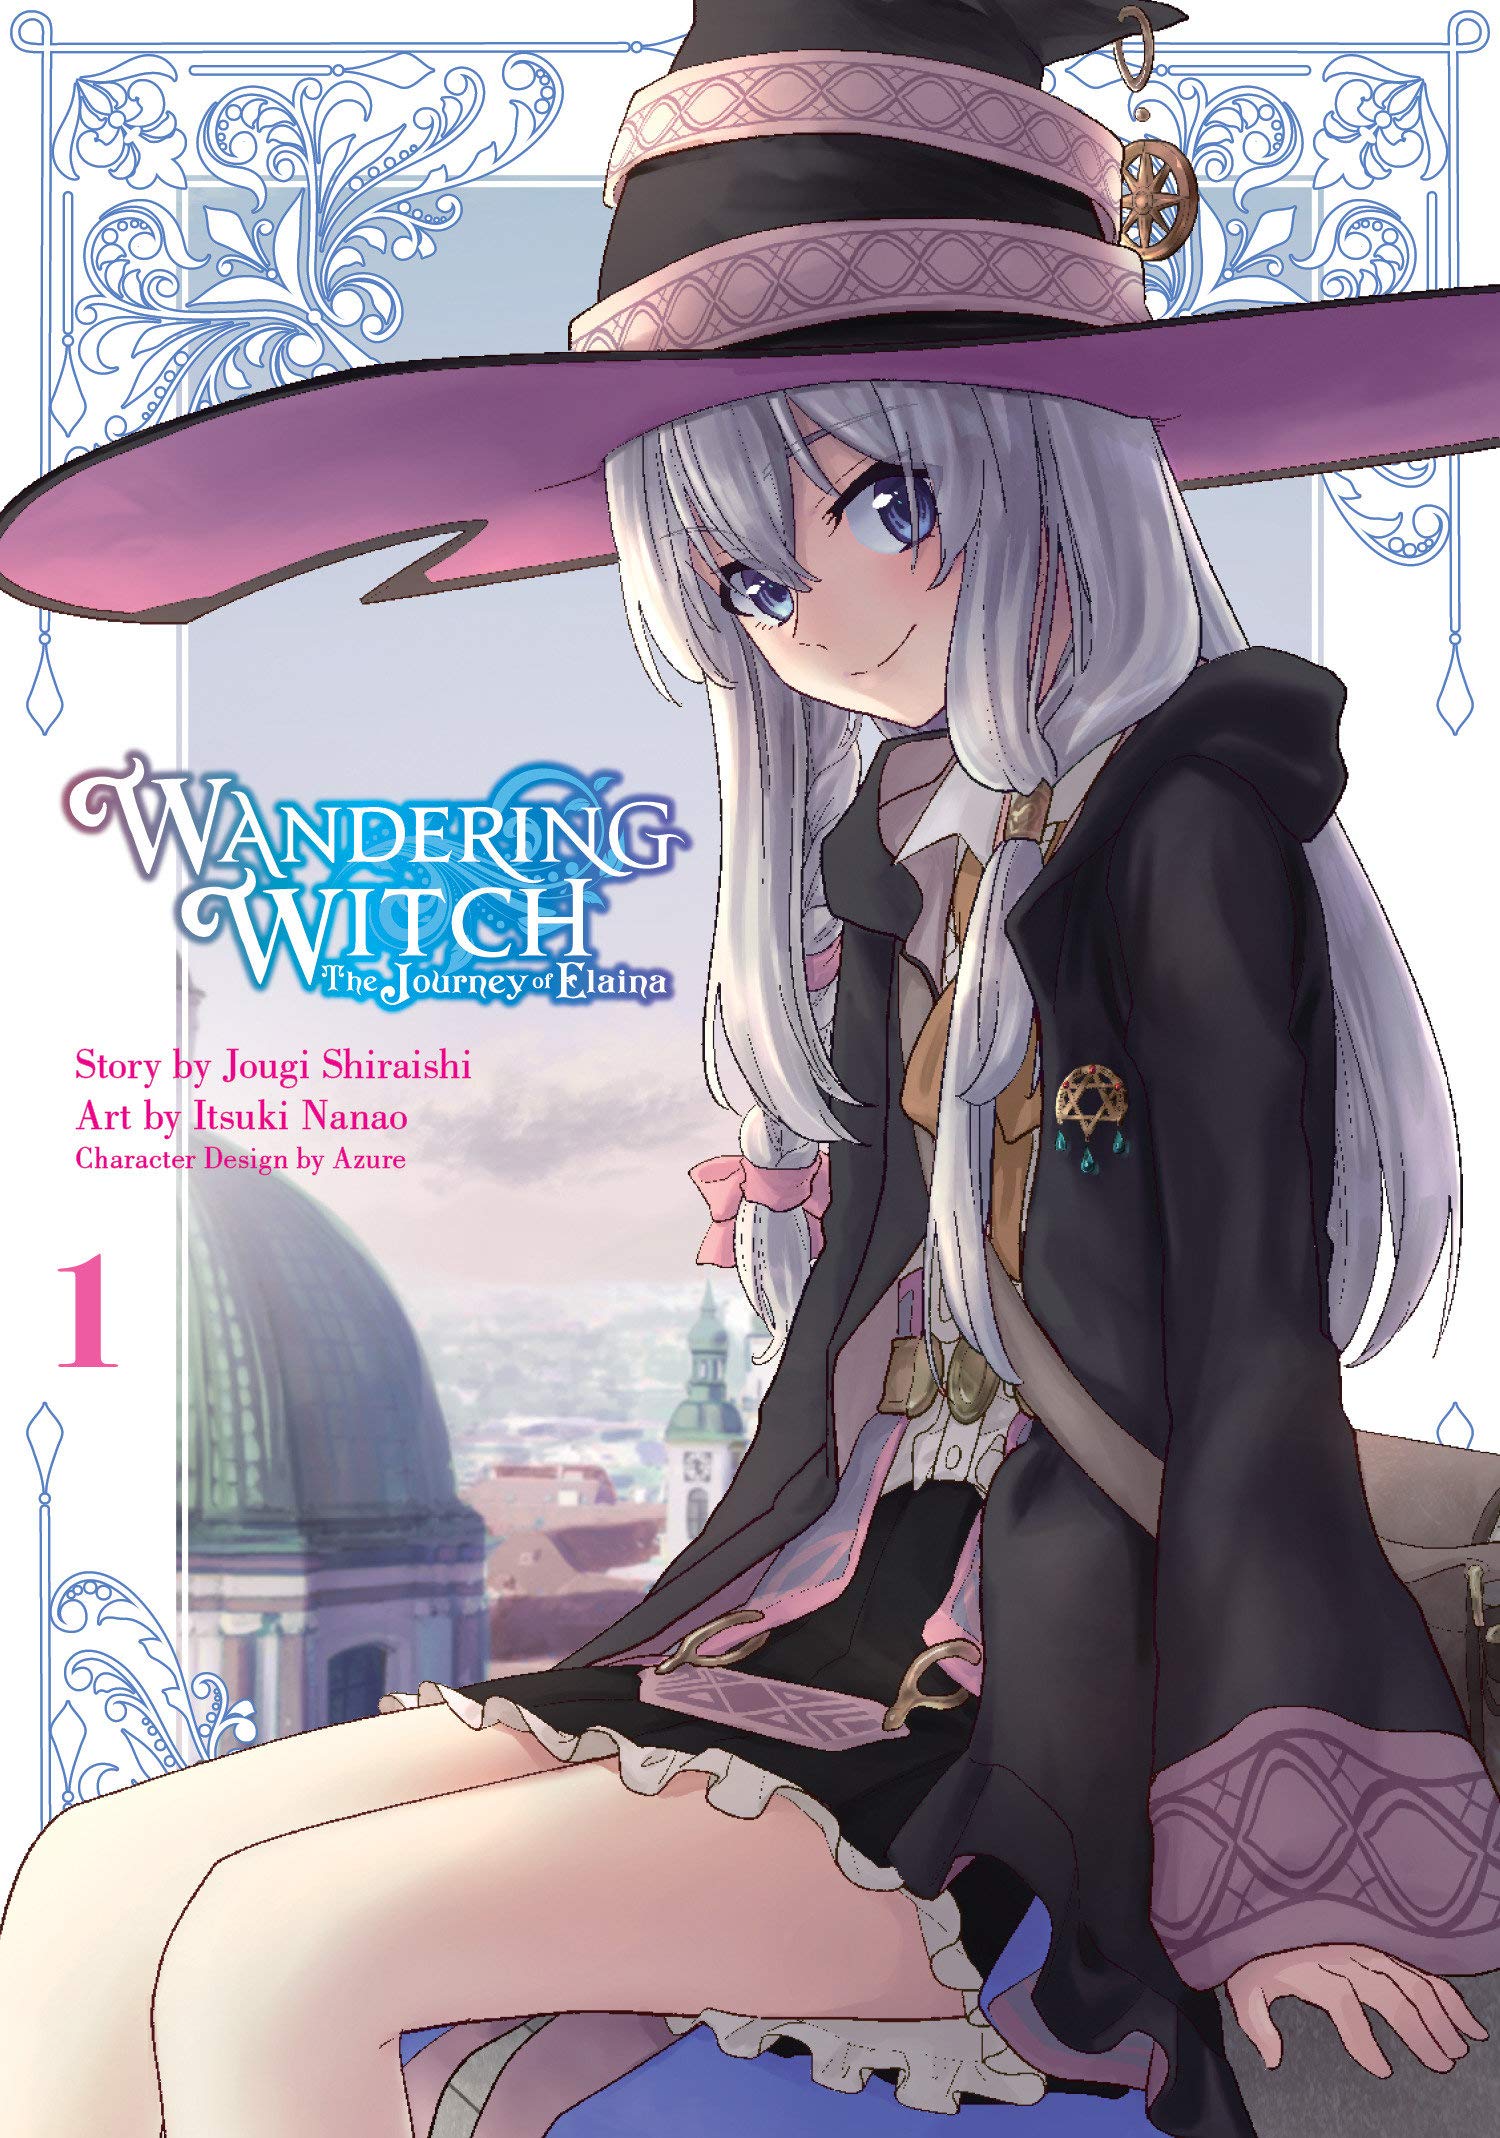 Wandering Witch - Volume 1